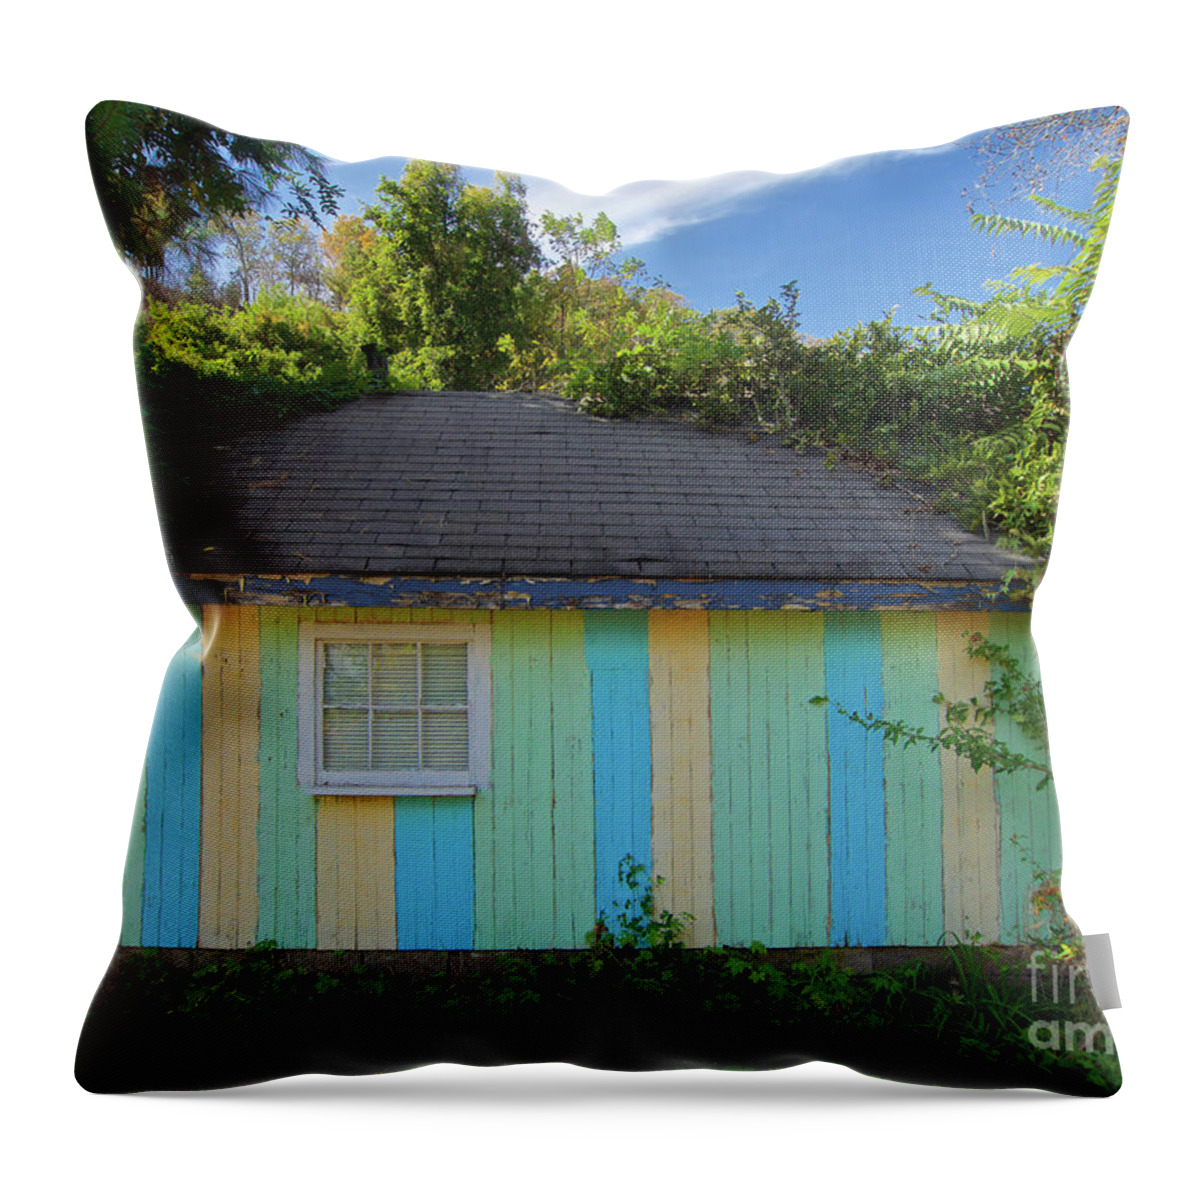 Hut Throw Pillow featuring the photograph Colorful Building In The Bushes by Mark Miller